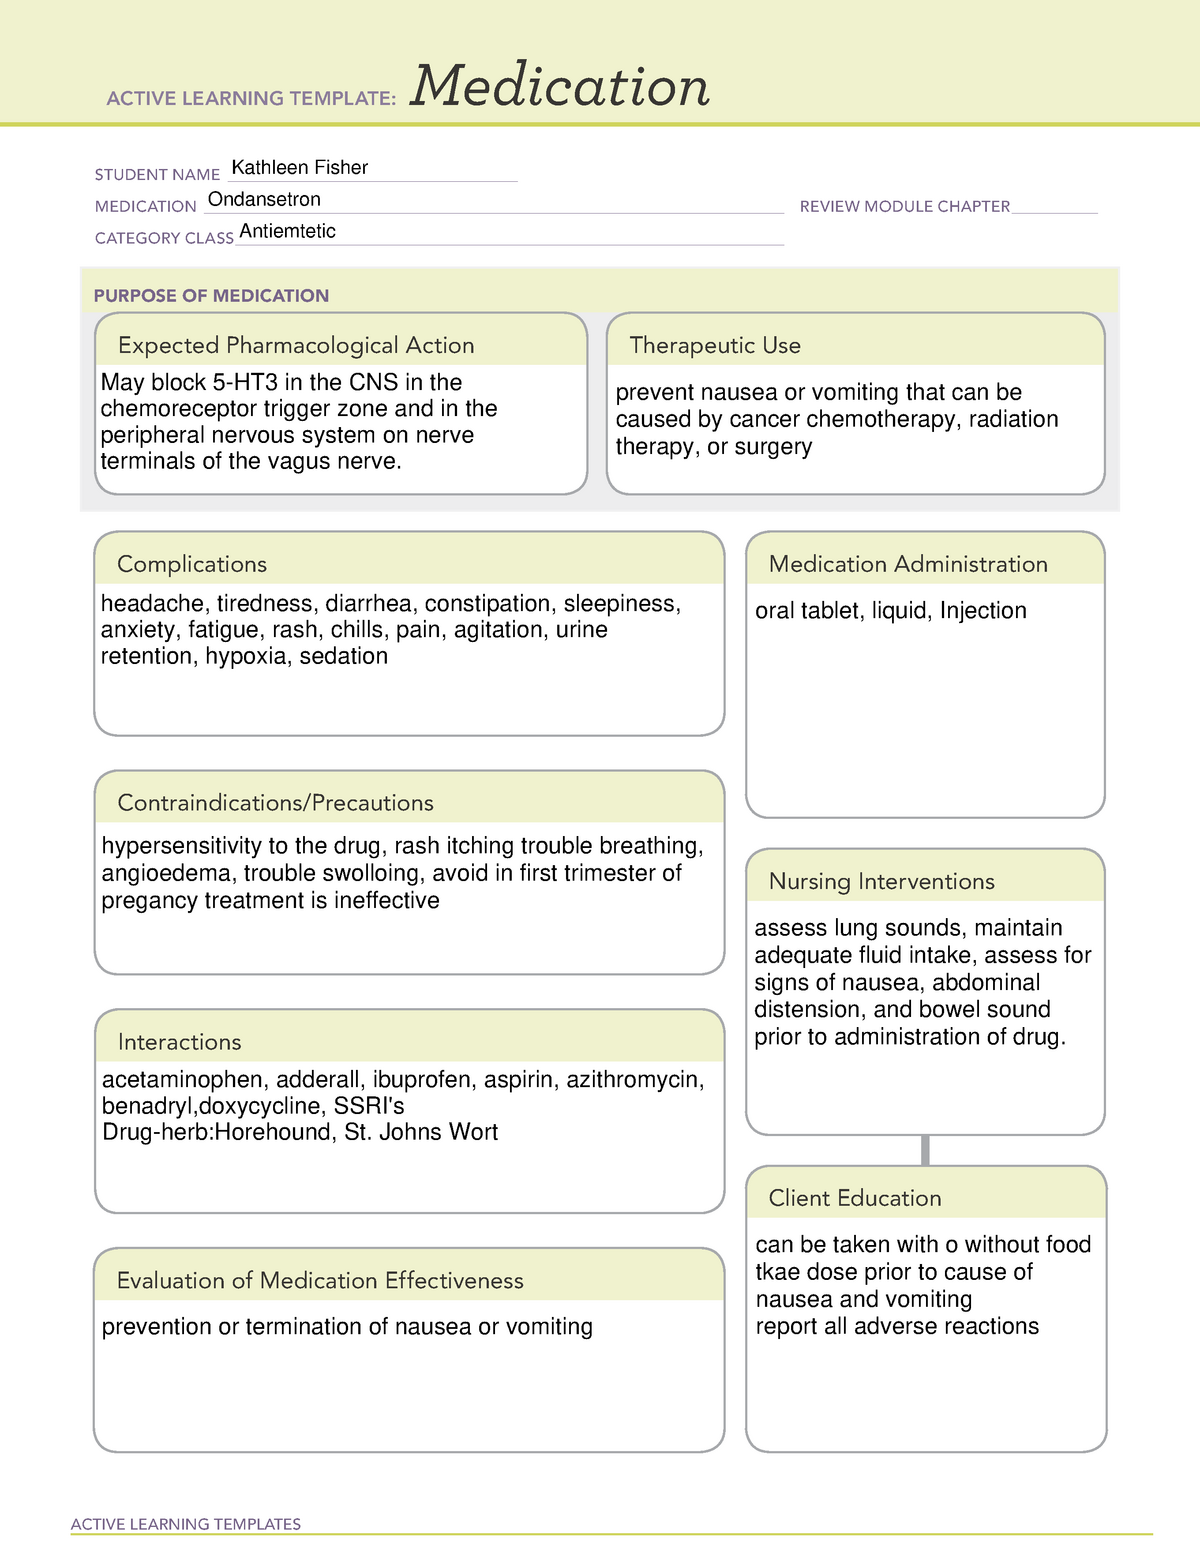 Medtemp ondansetron ATI medication/system template ACTIVE LEARNING